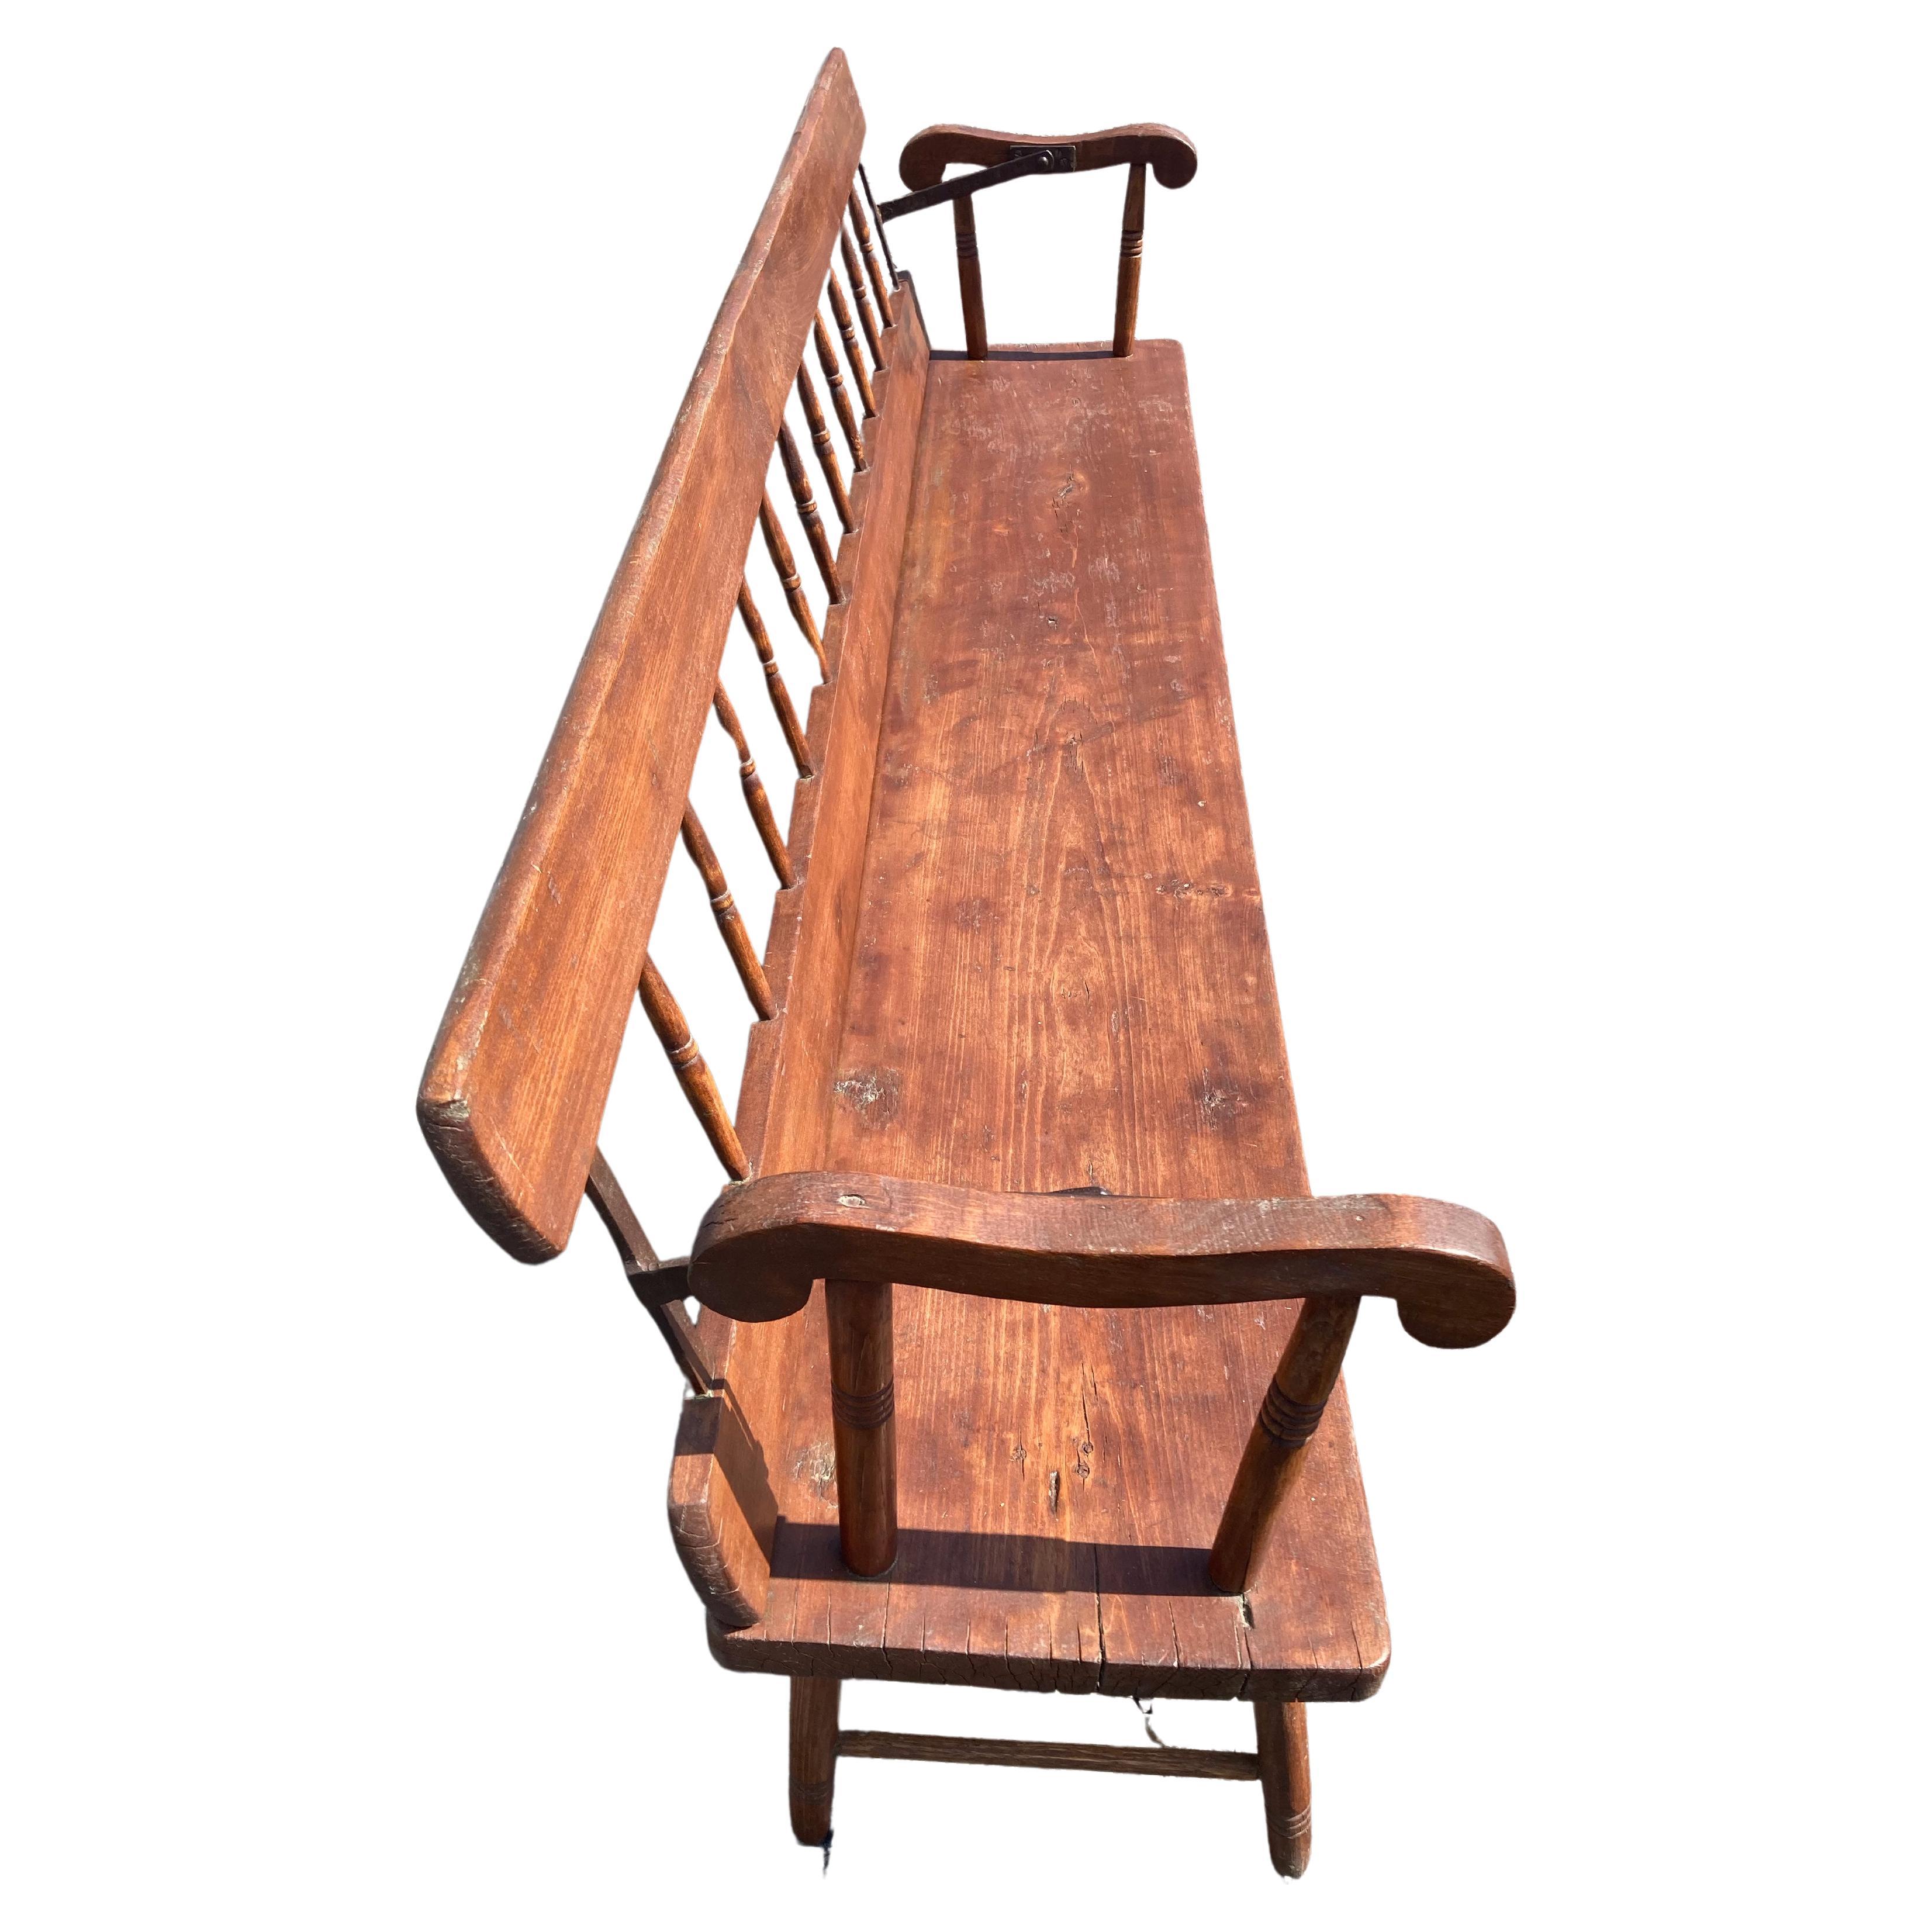 A beautifully designed 19th century pine very large bench having a spindle back that flips one one side to the other, so bench can be used in either direction. Was probably used in an American meeting house.
Measures: Arm height 27.